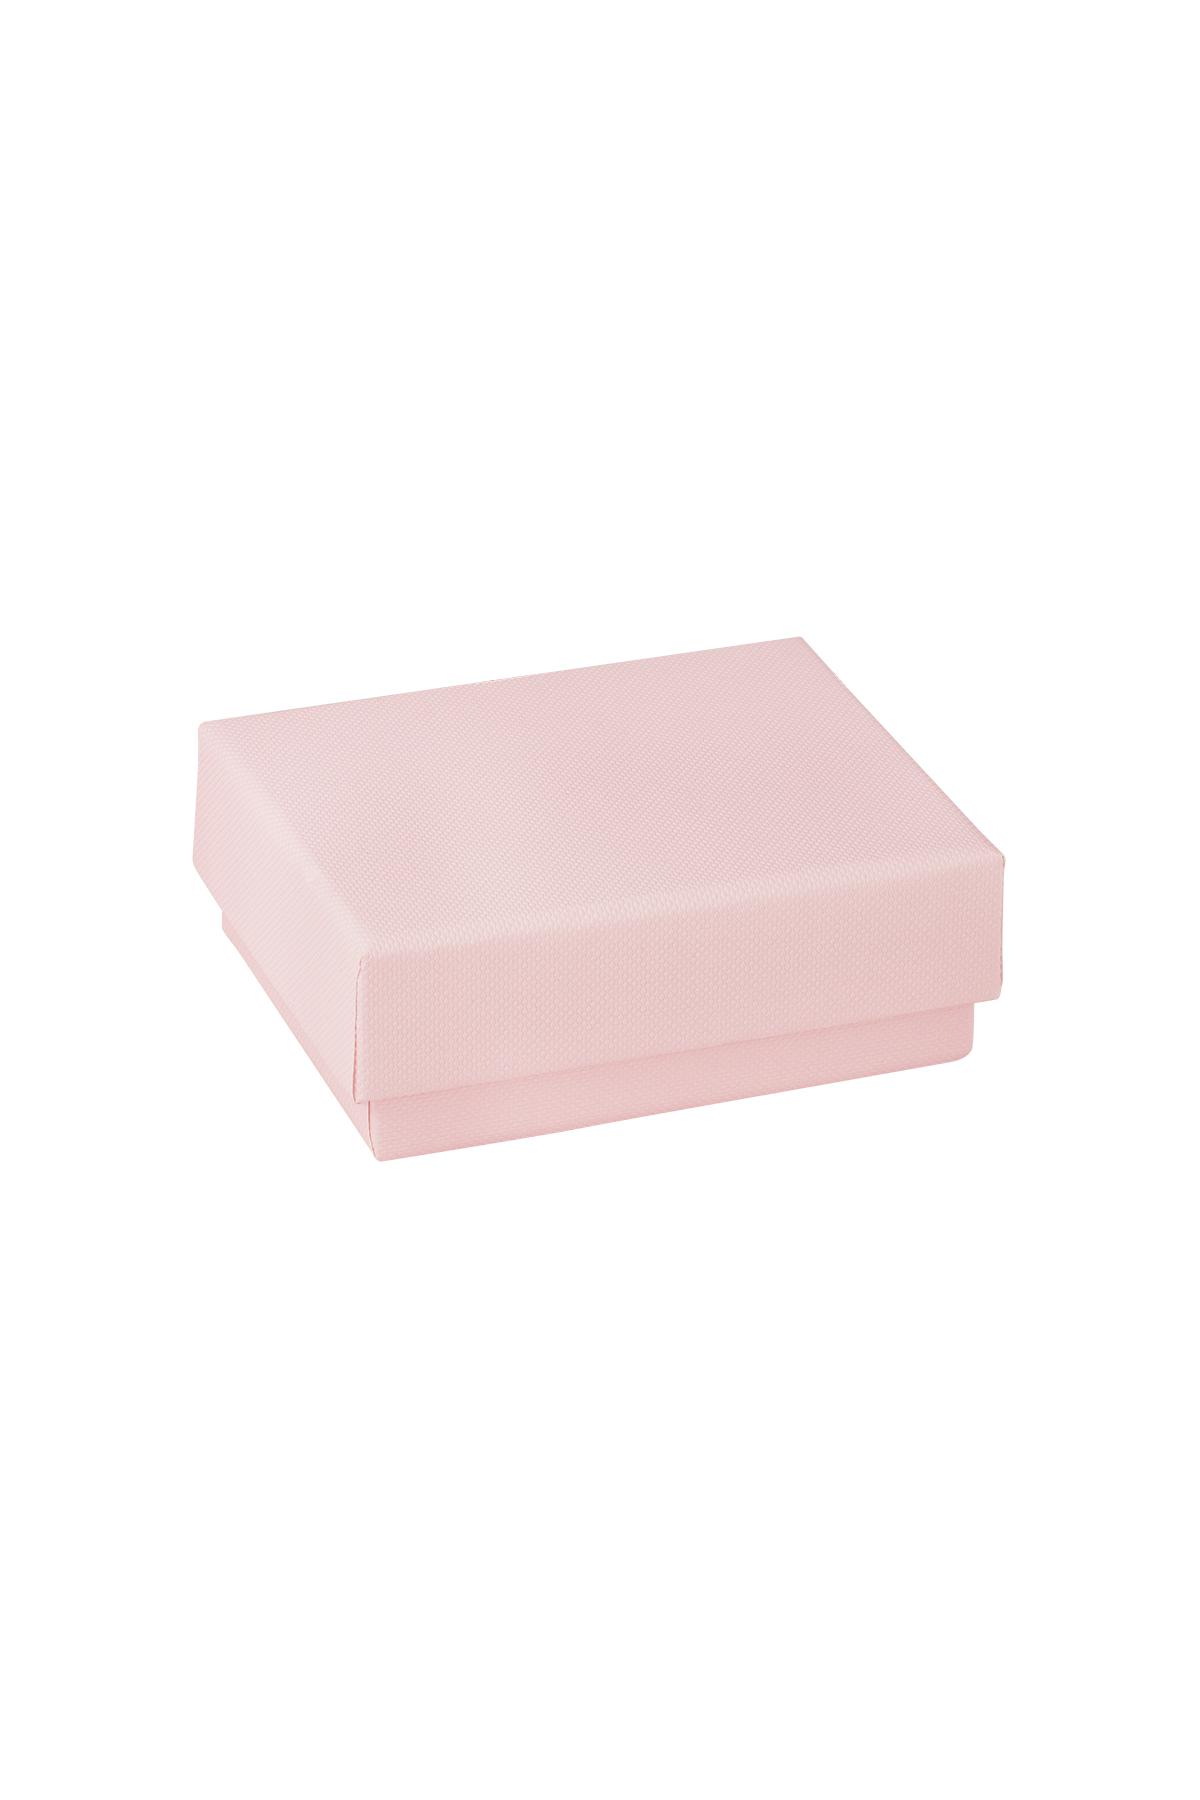 Jewelery box with loose lid Pink Paper